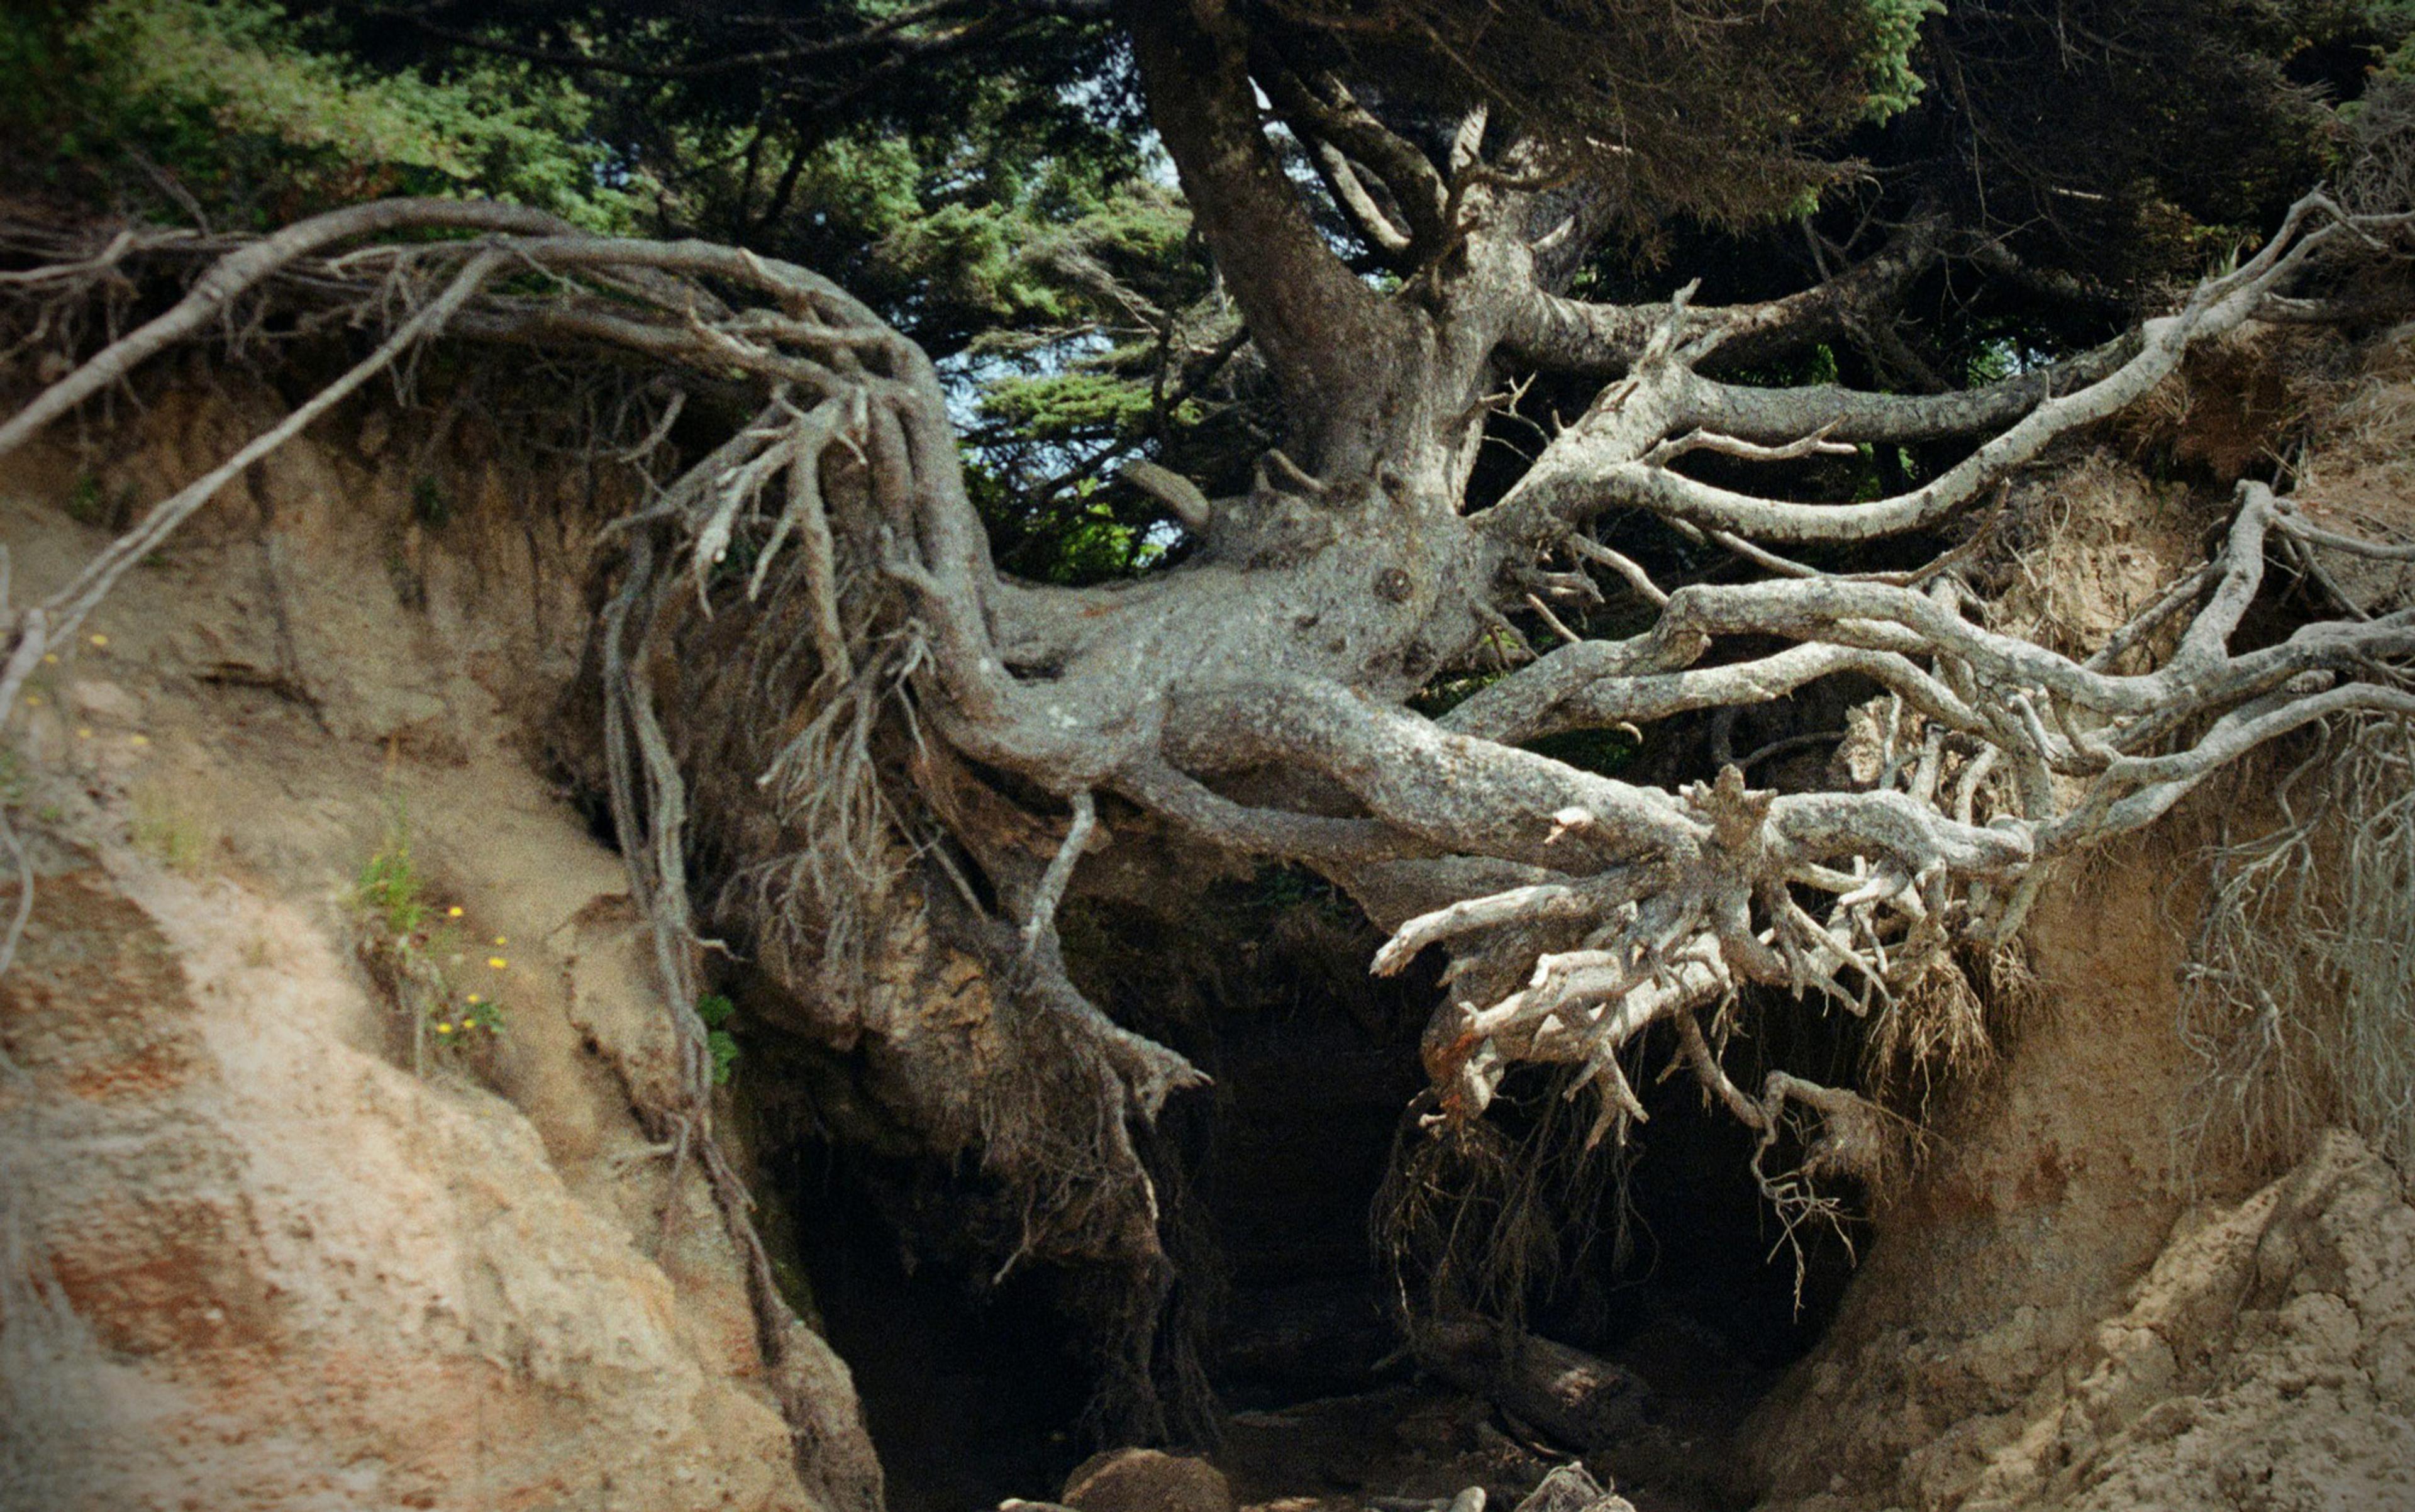 A tree with exposed roots growing from an eroded cliffside, with dense foliage in the background.